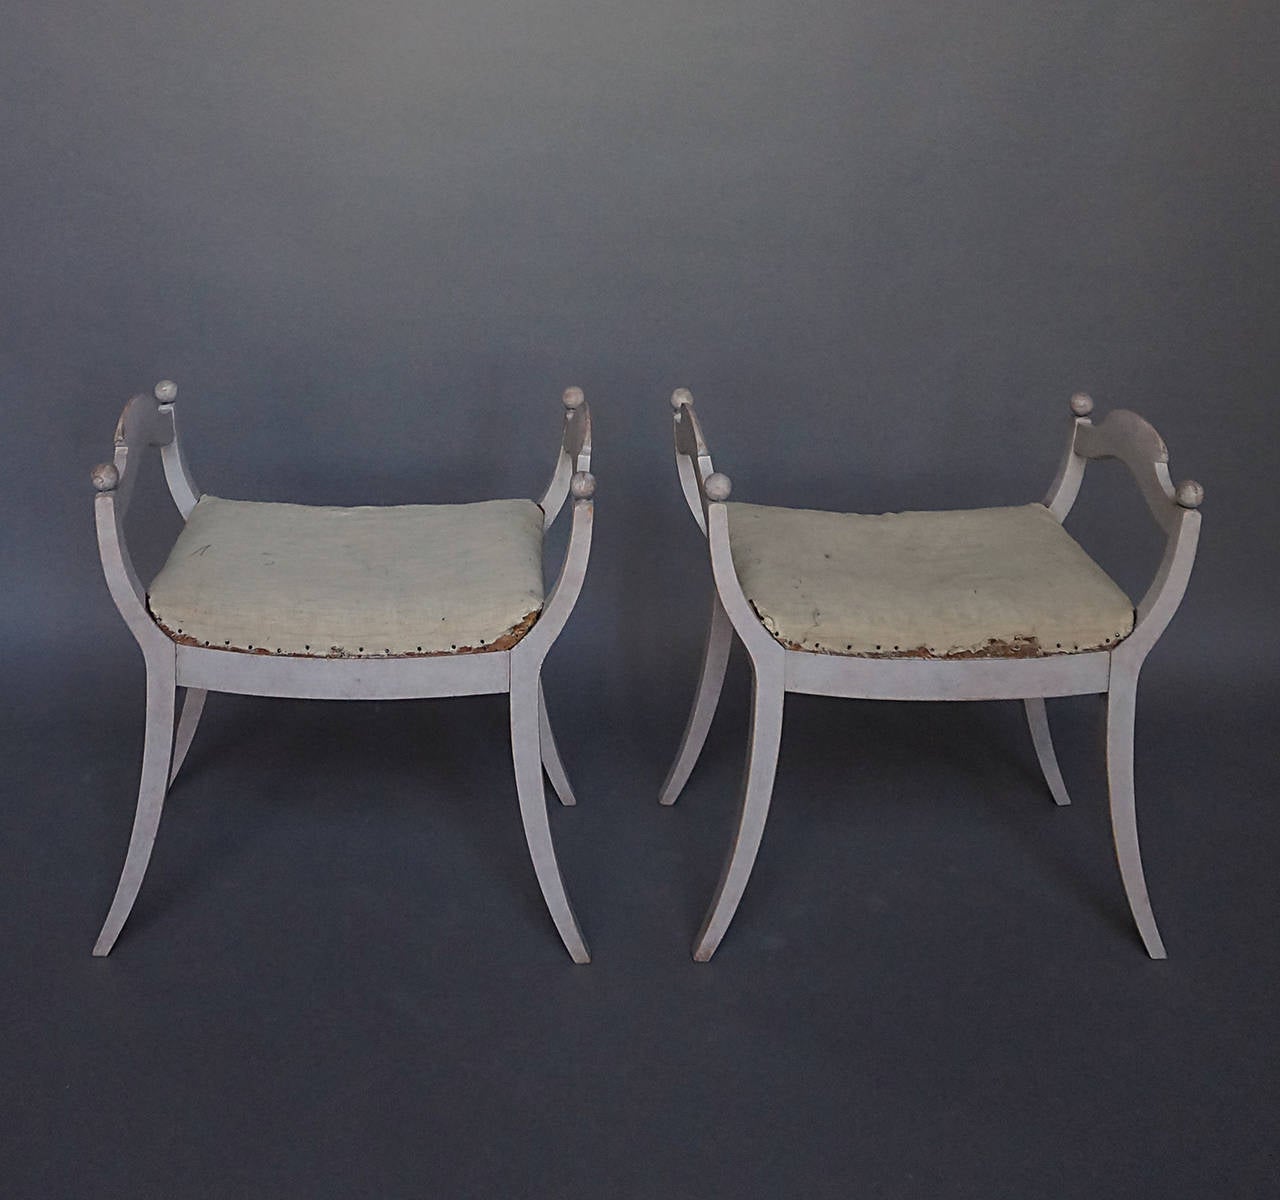 Pair of stools in the neoclassical style, Sweden circa 1910, with upholstered seats, shaped armrests, and saber legs. Sturdy and quite comfortable.